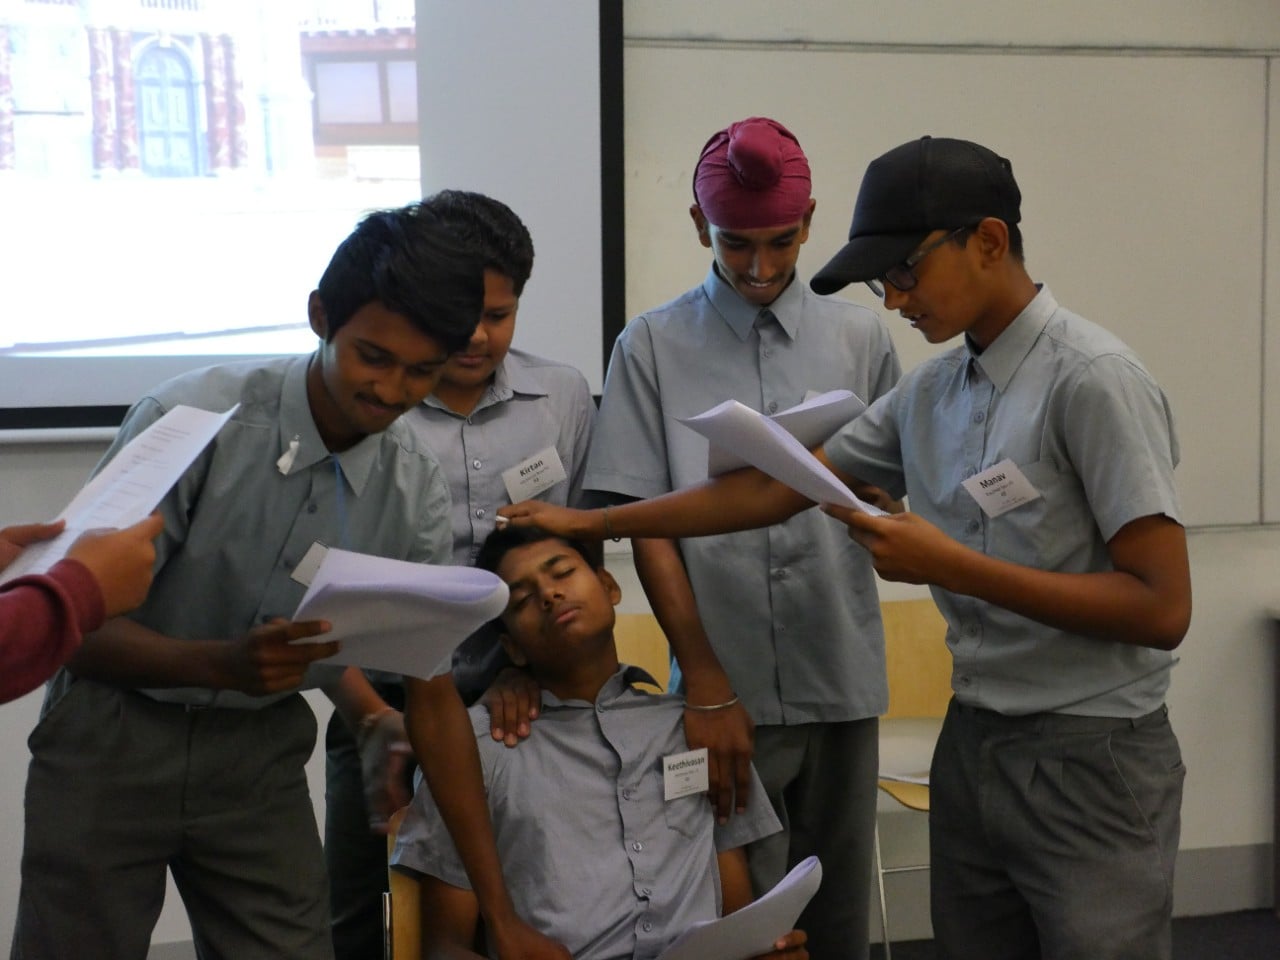 Group of students interacting